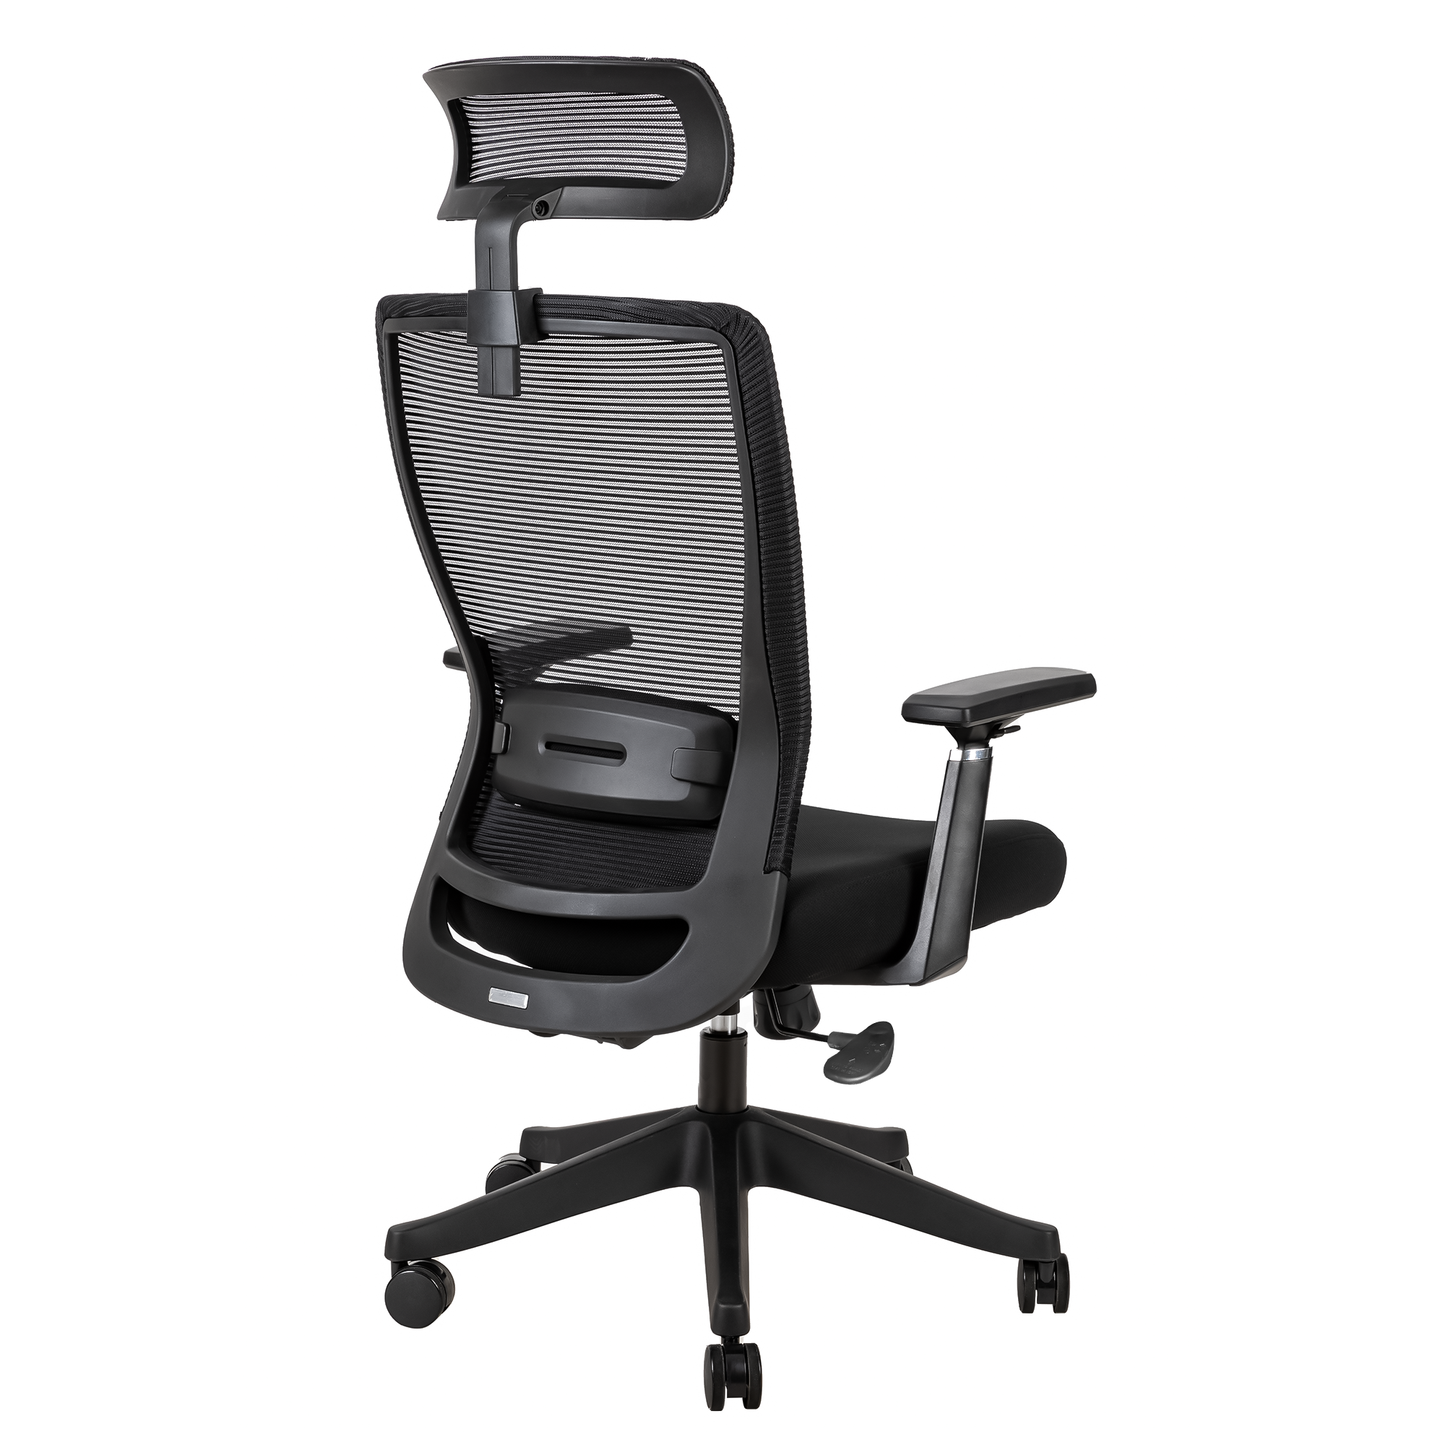 High back office mesh chair with lumbar support; color black; 300lbs